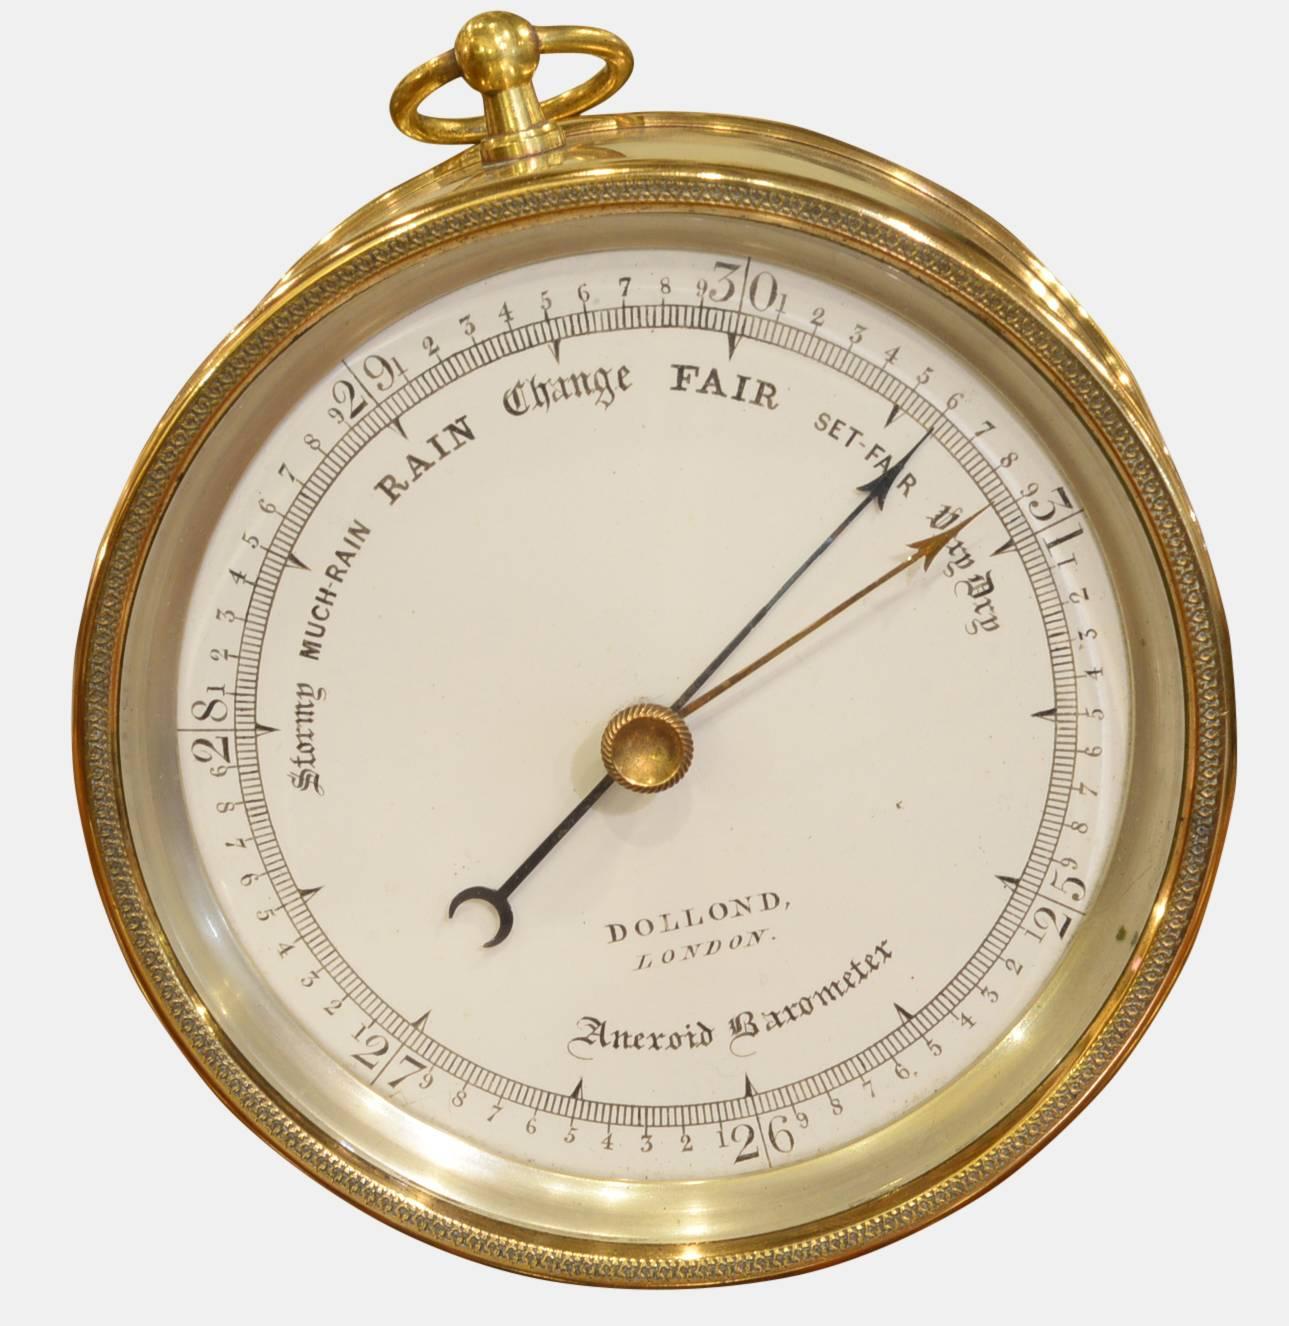 An early Victorian Vidie style brass cased aneroid barometer by Dubors and Casse.